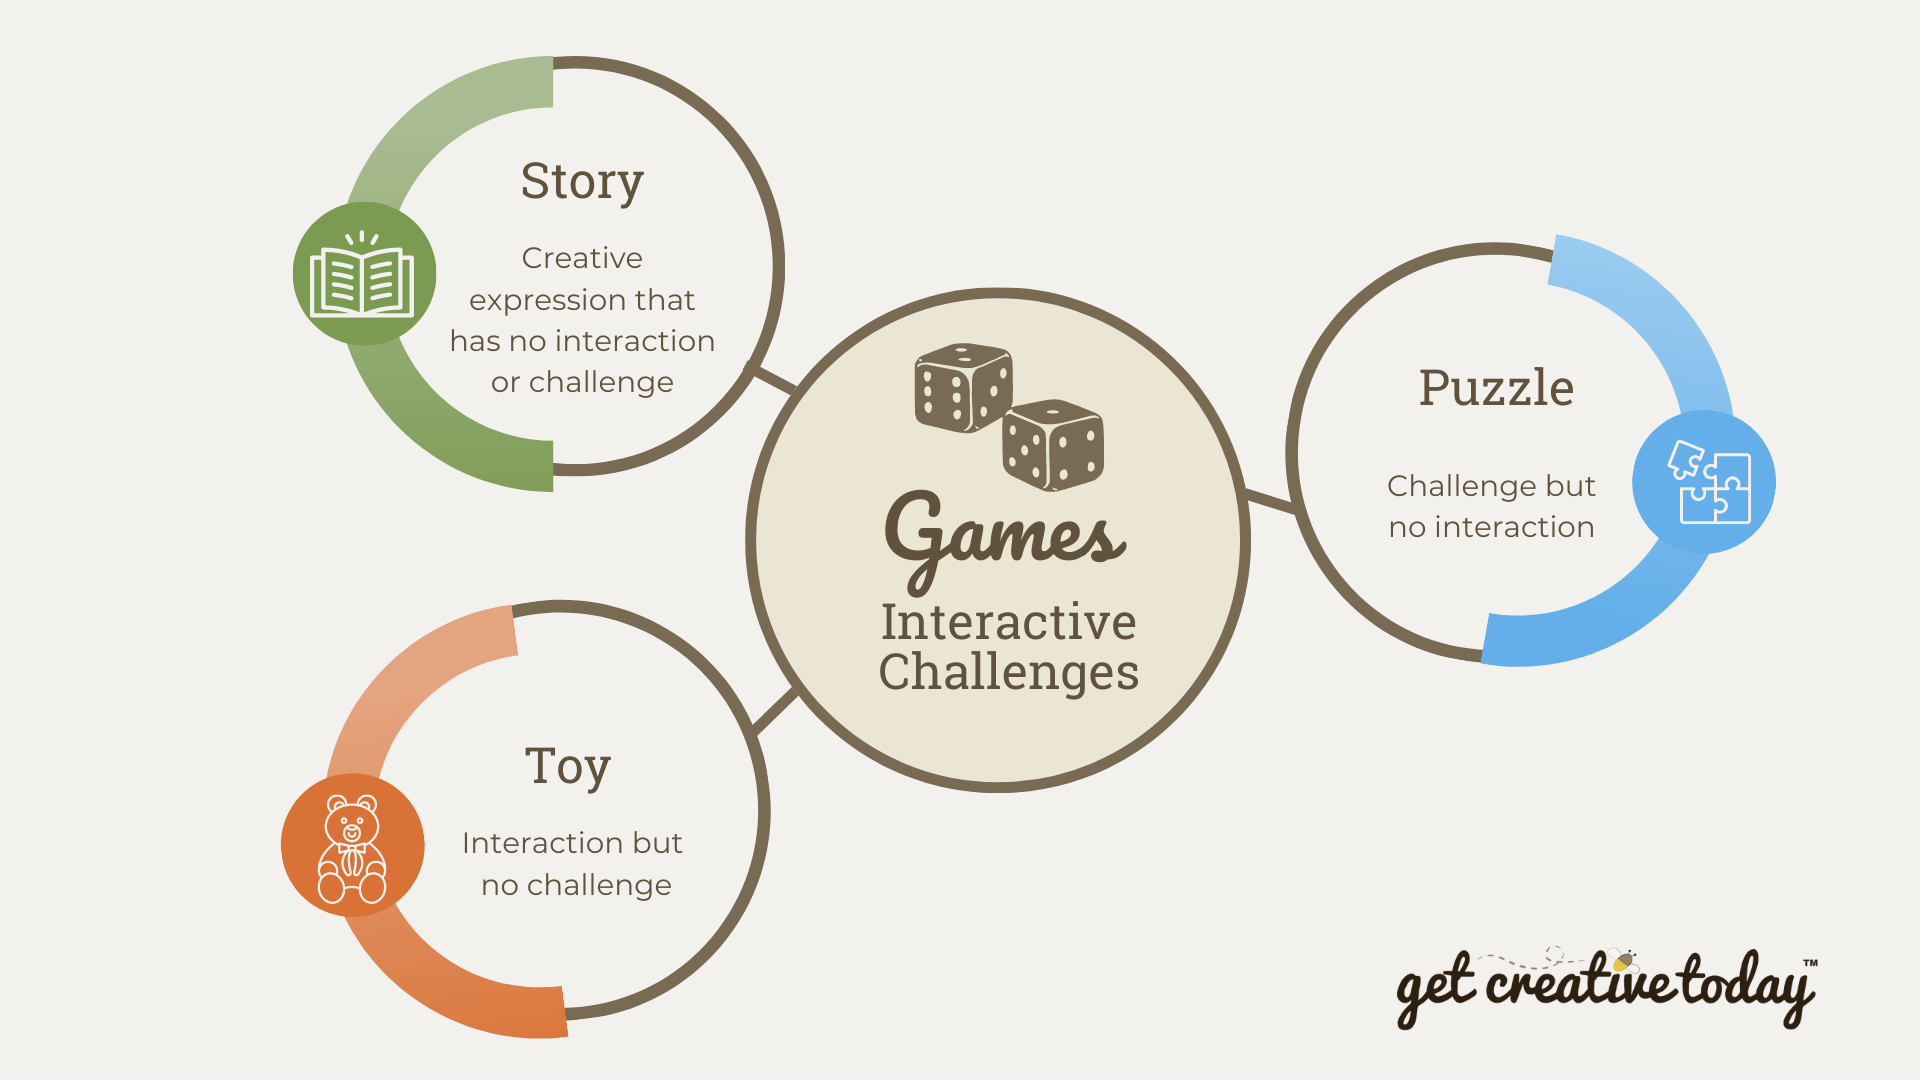 Games are interactive challenges